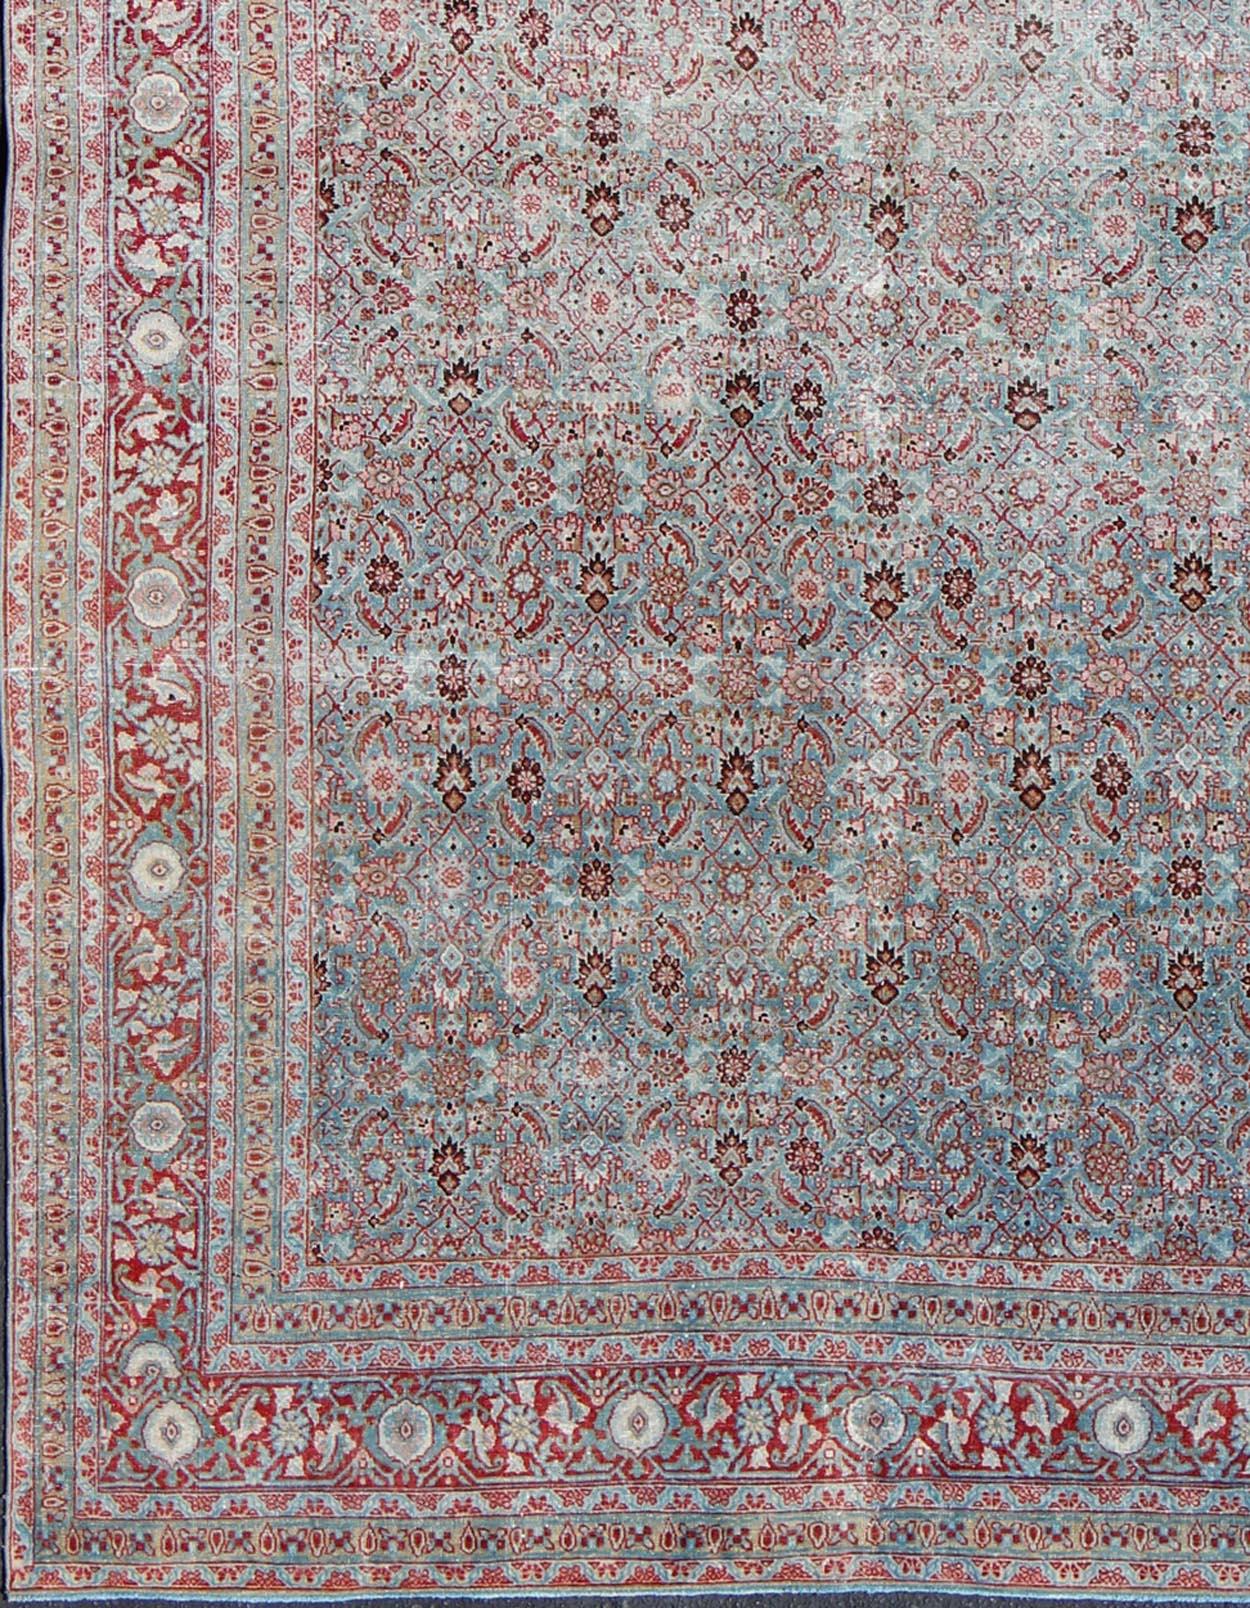 Light blue and red Persian Tabriz rug antique sub floral and geometric design, Keivan Woven Arts / rug ema-7538, country of origin / type: Iran / Tabriz, circa 1910.

This antique Persian Tabriz carpet (circa 1910) features a refined palate of light